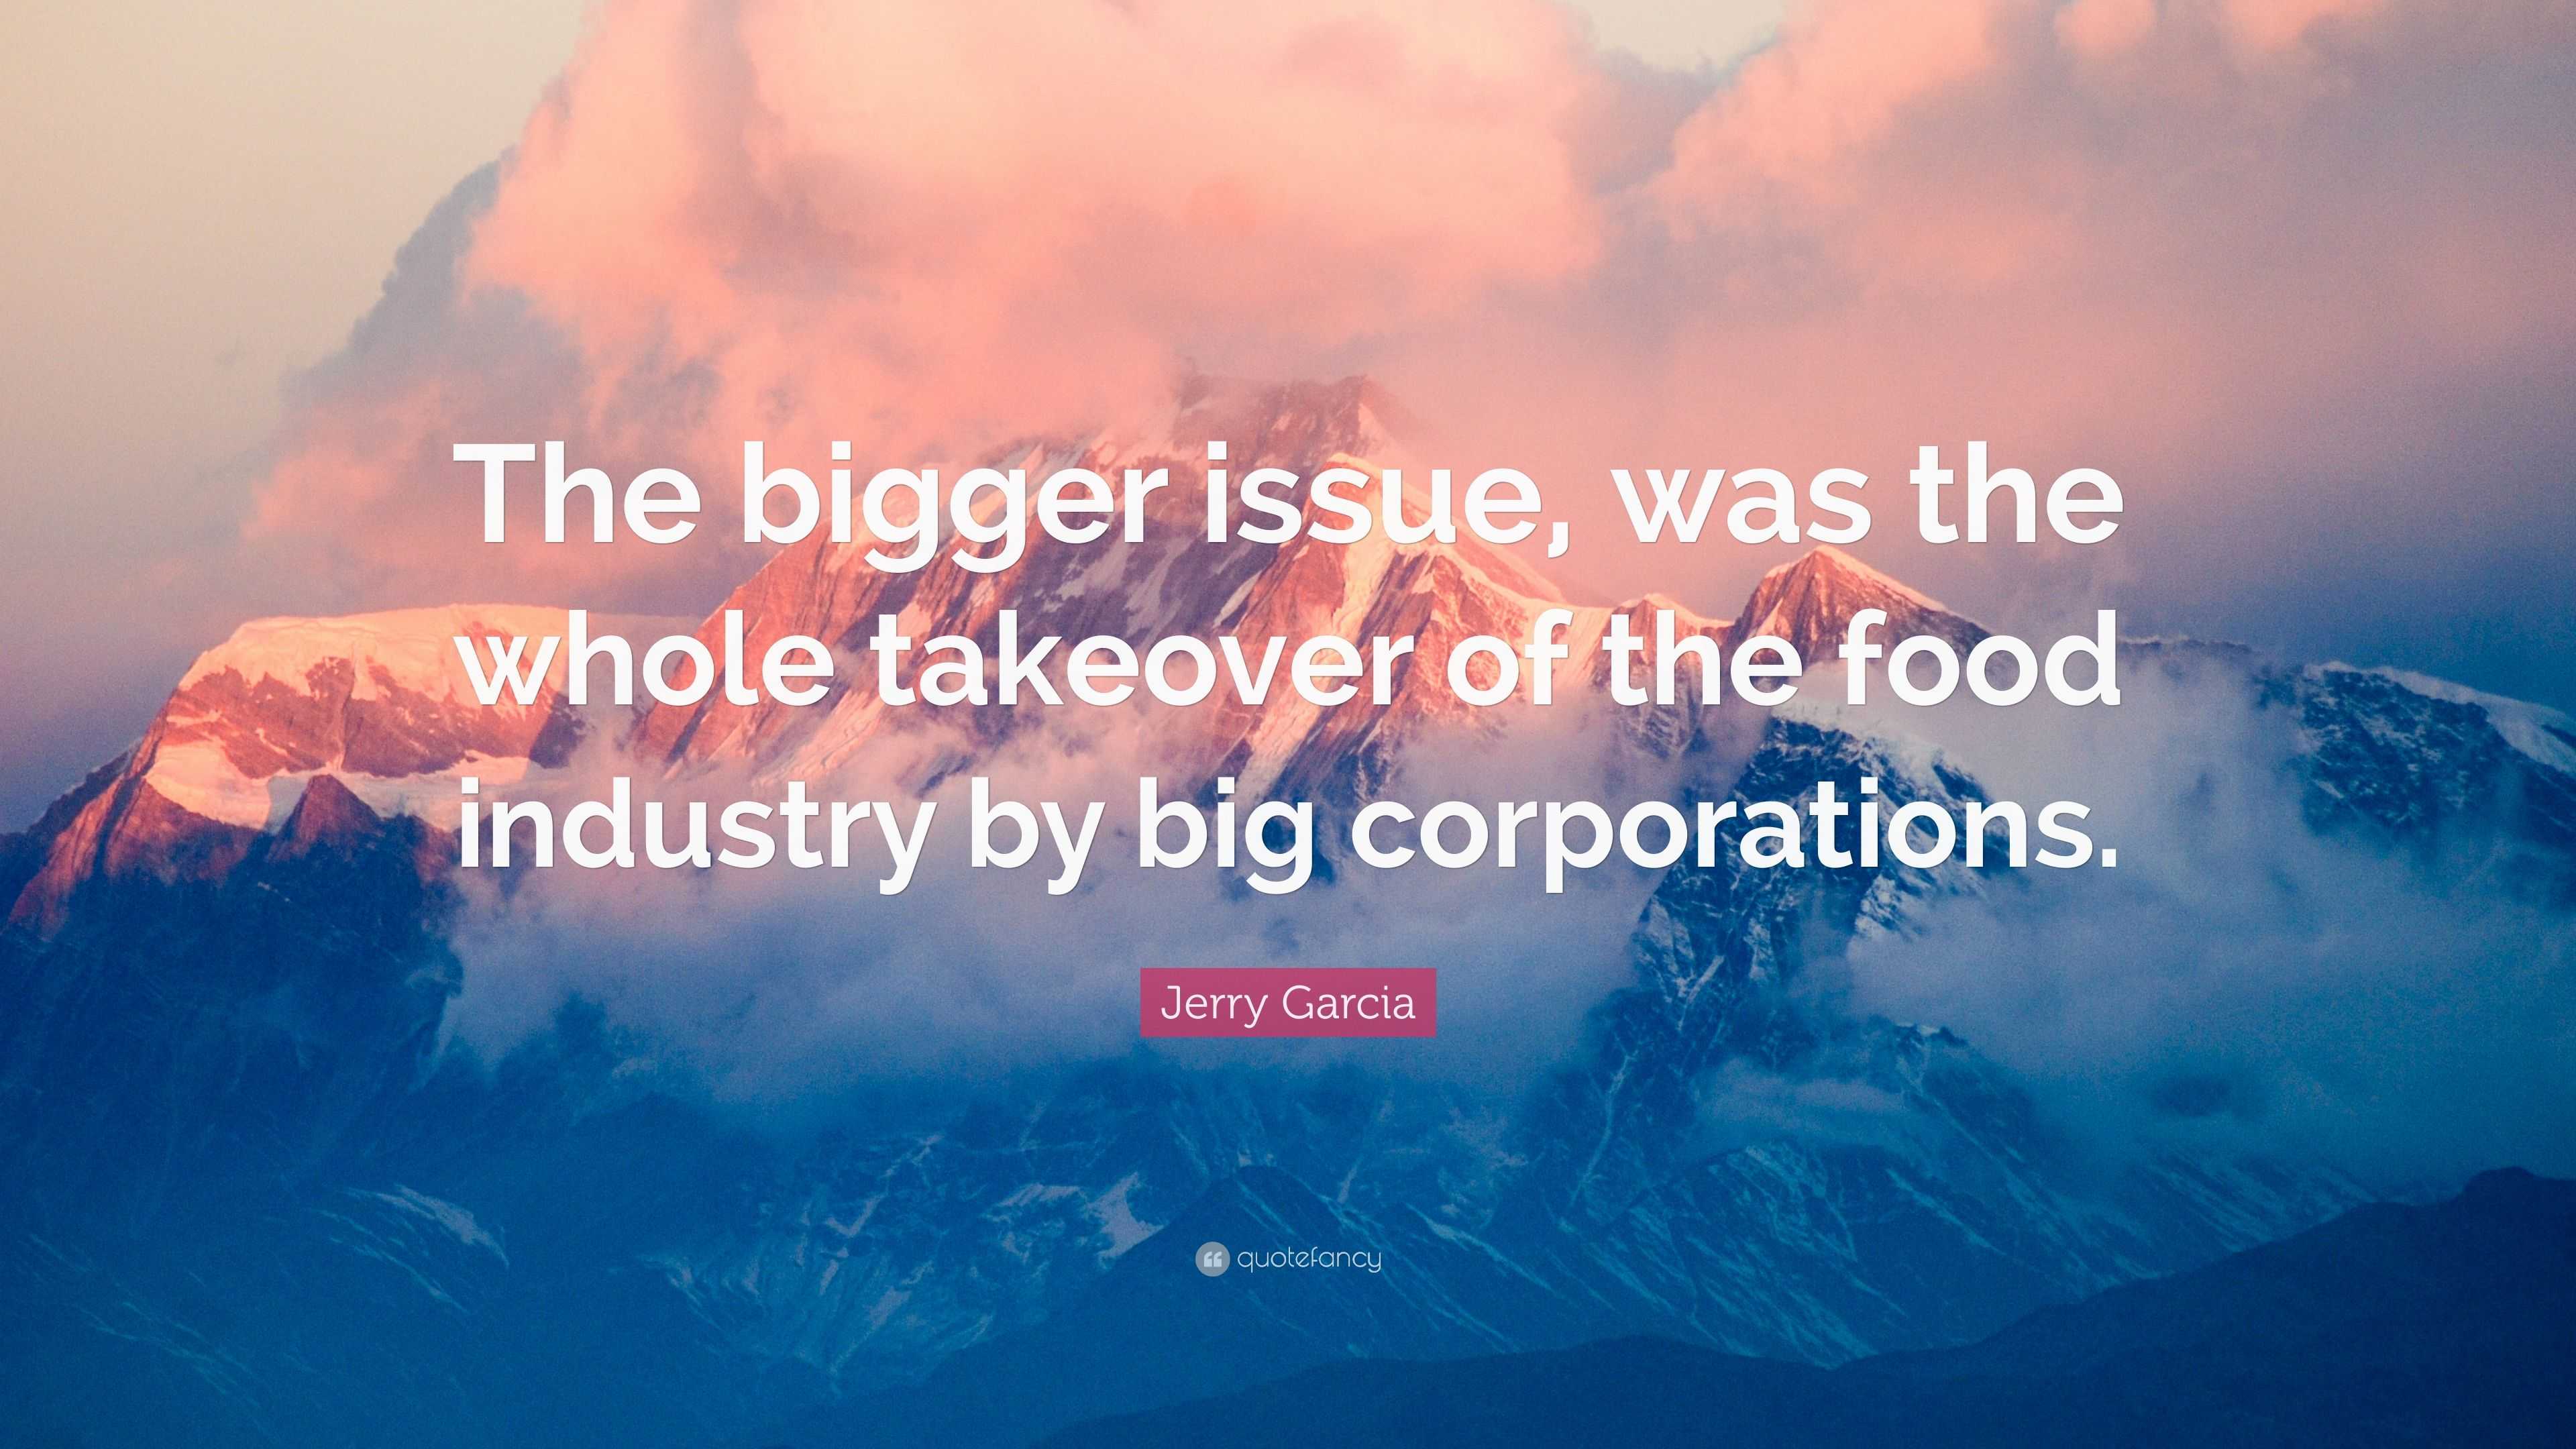 Jerry Garcia Quote: “The bigger issue, was the whole takeover of the food  industry by big